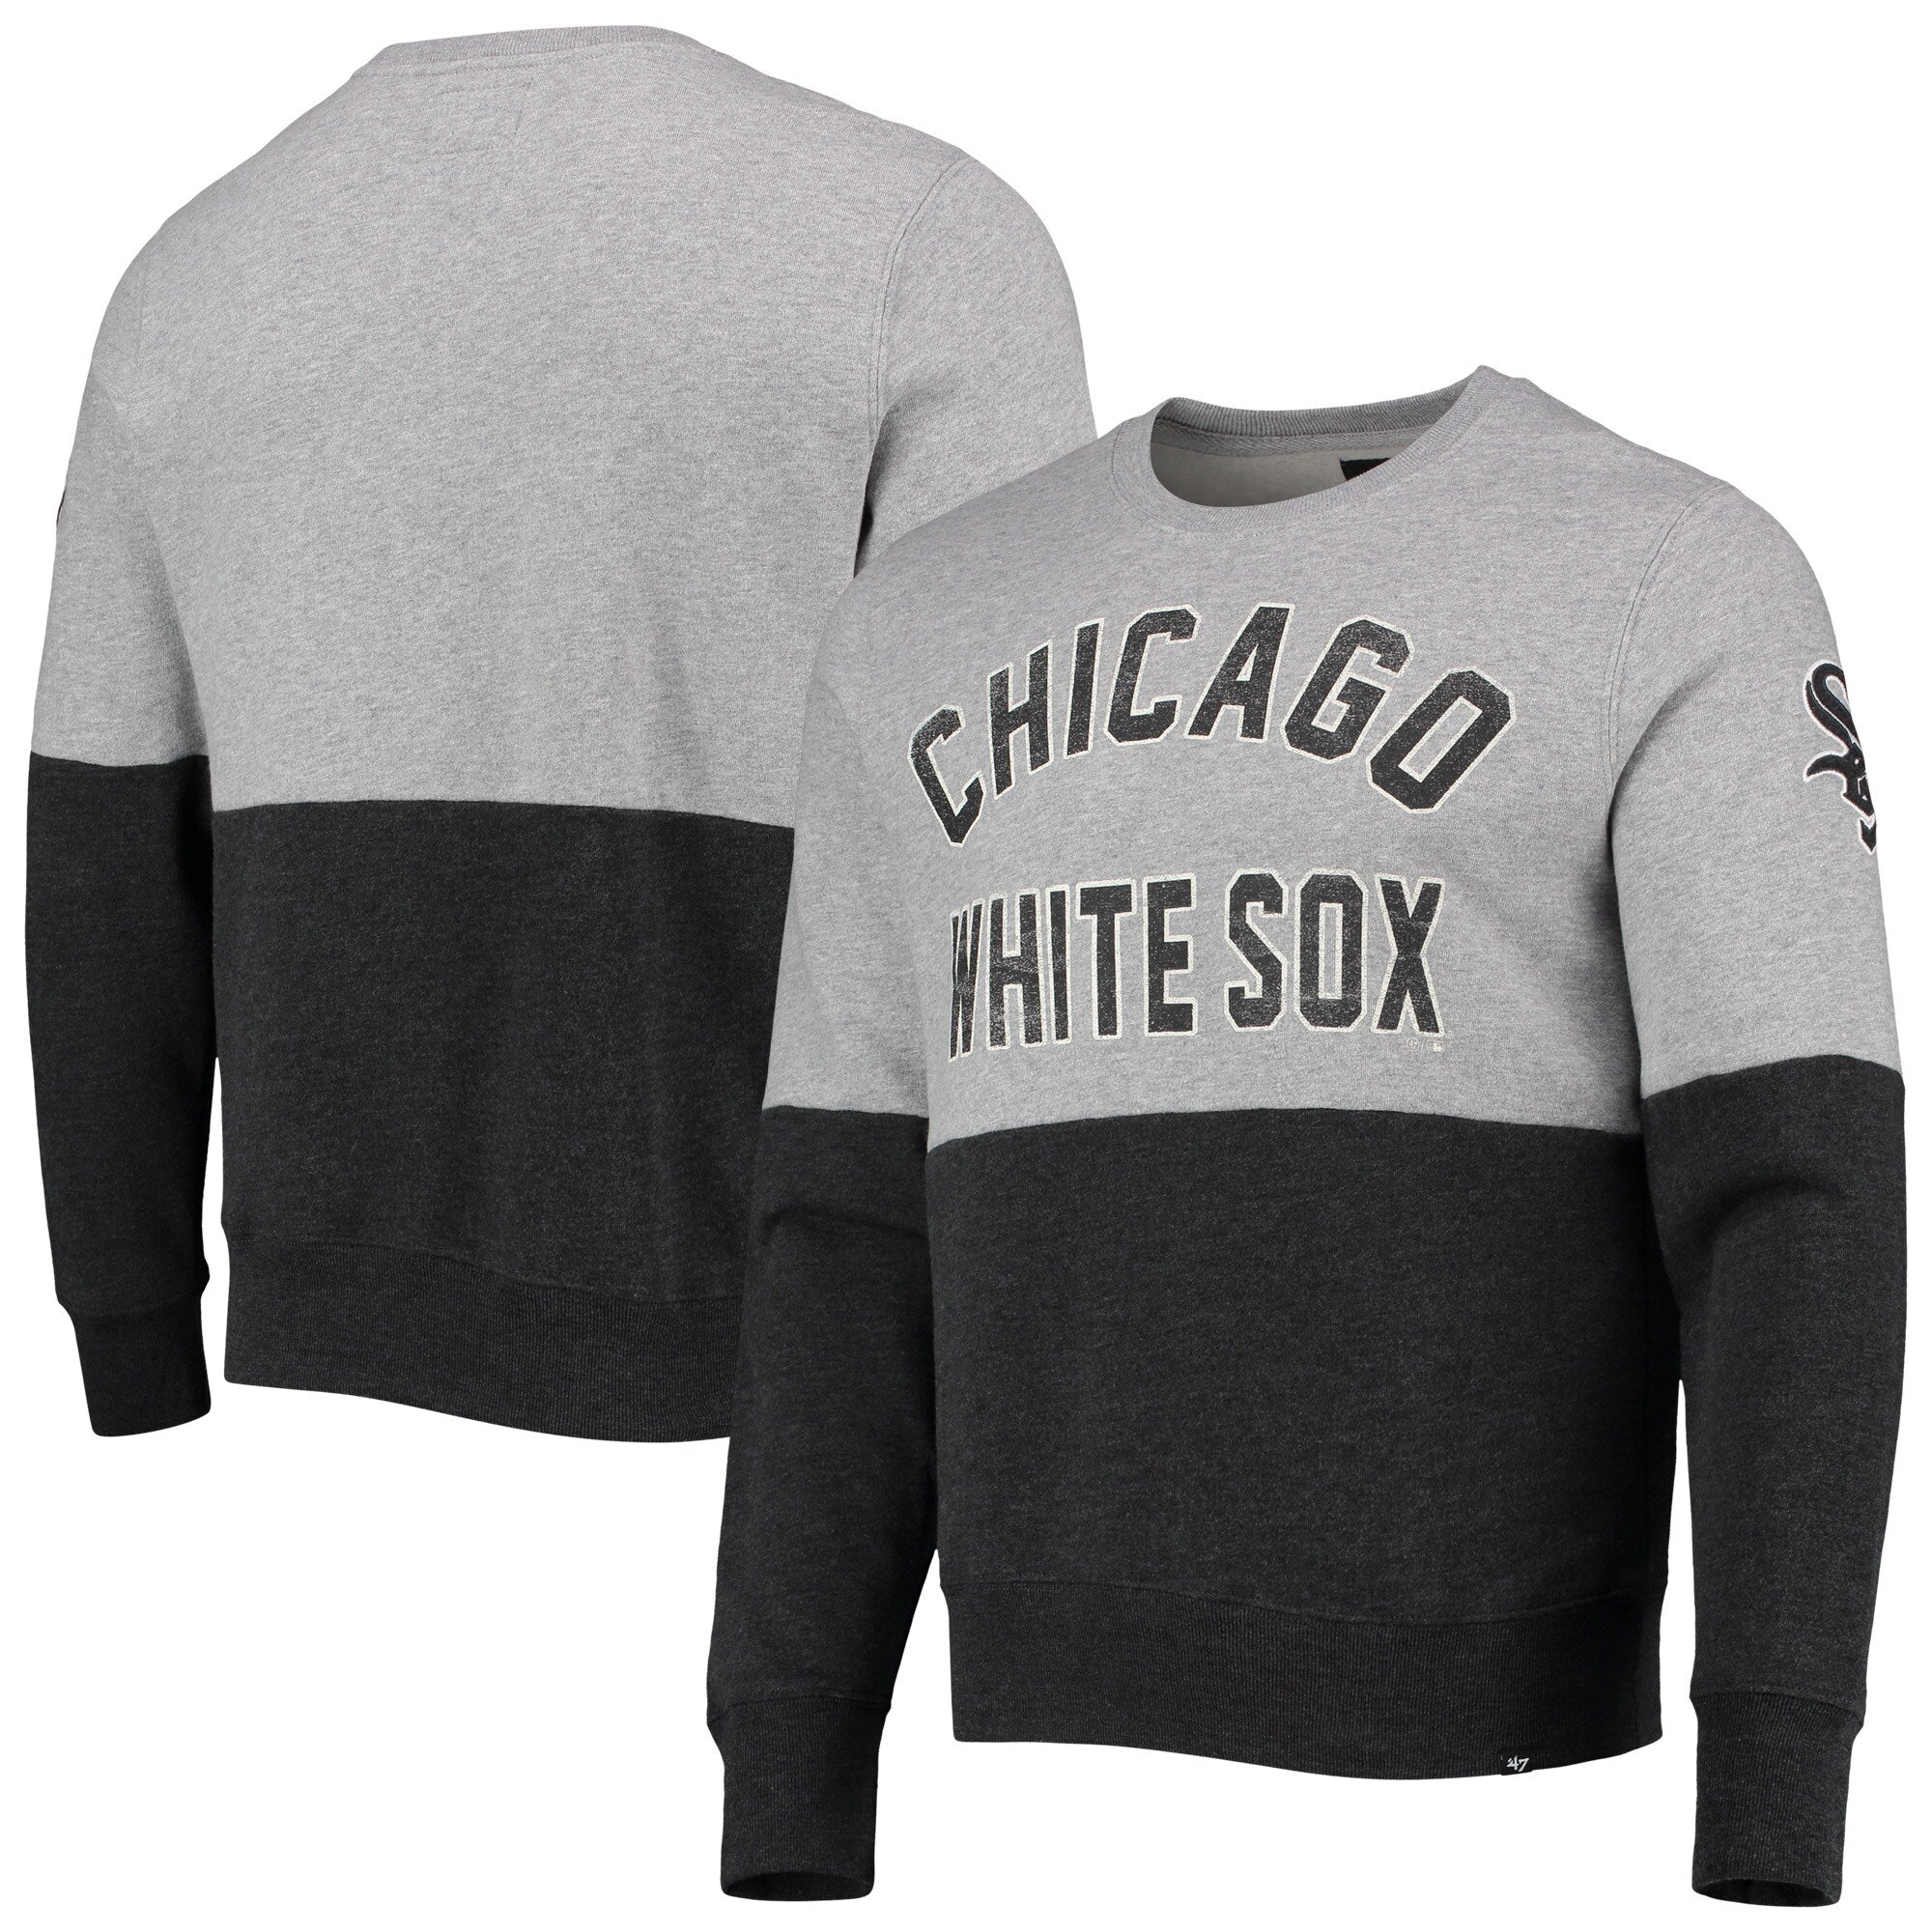 Chicago White Sox Shirts: T-Shirts, Pullovers & Hoodies - Clark